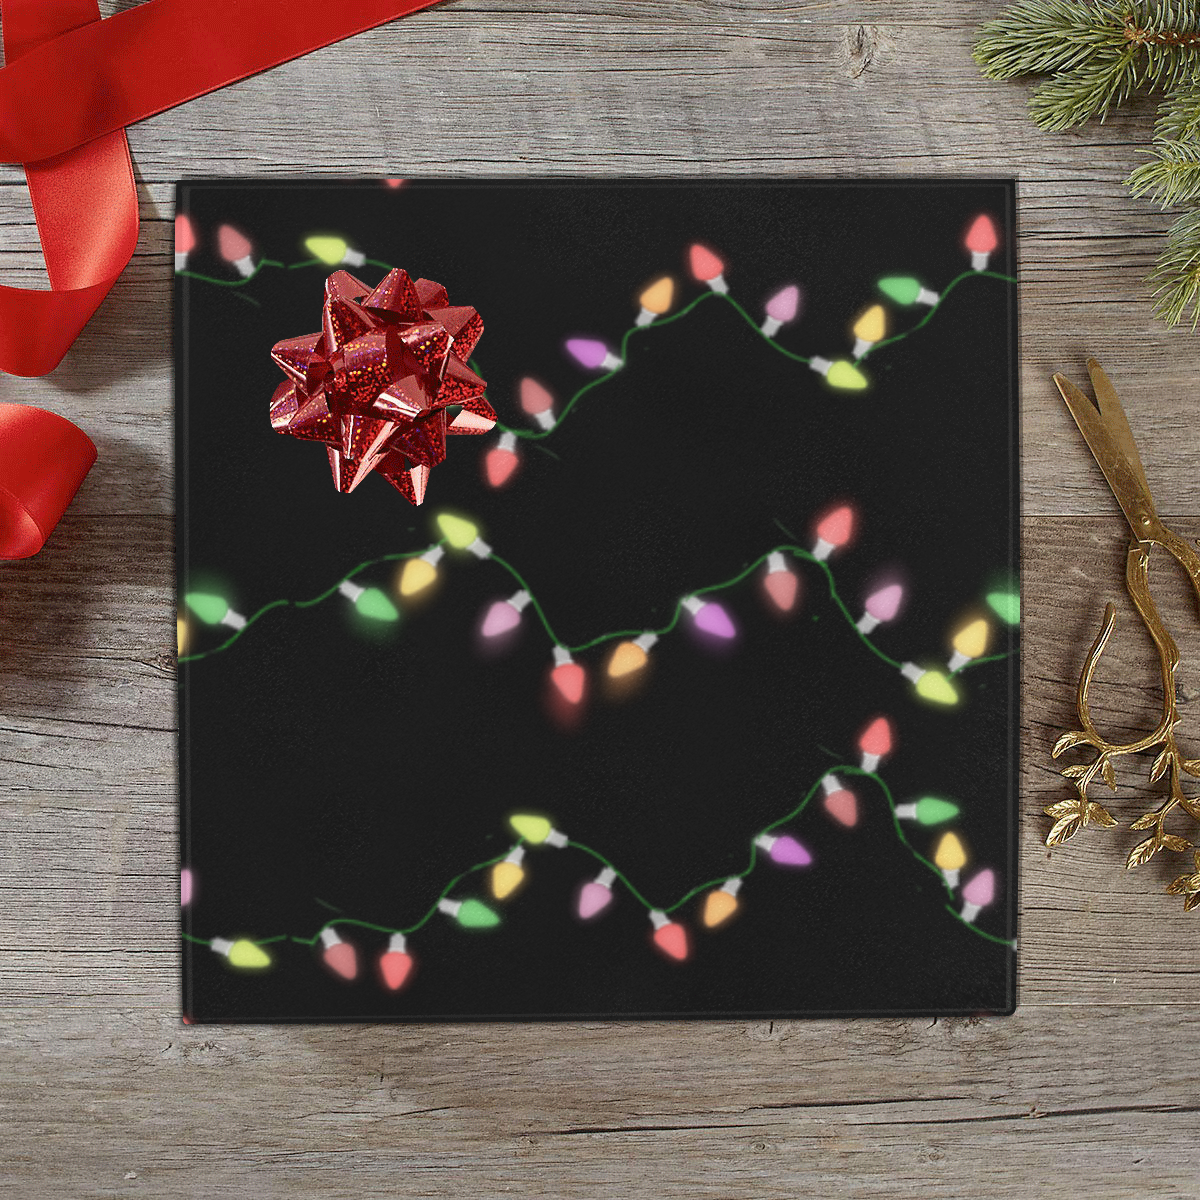 Festive Christmas Lights on Black Gift Wrapping Paper 58"x 23" (5 Rolls)